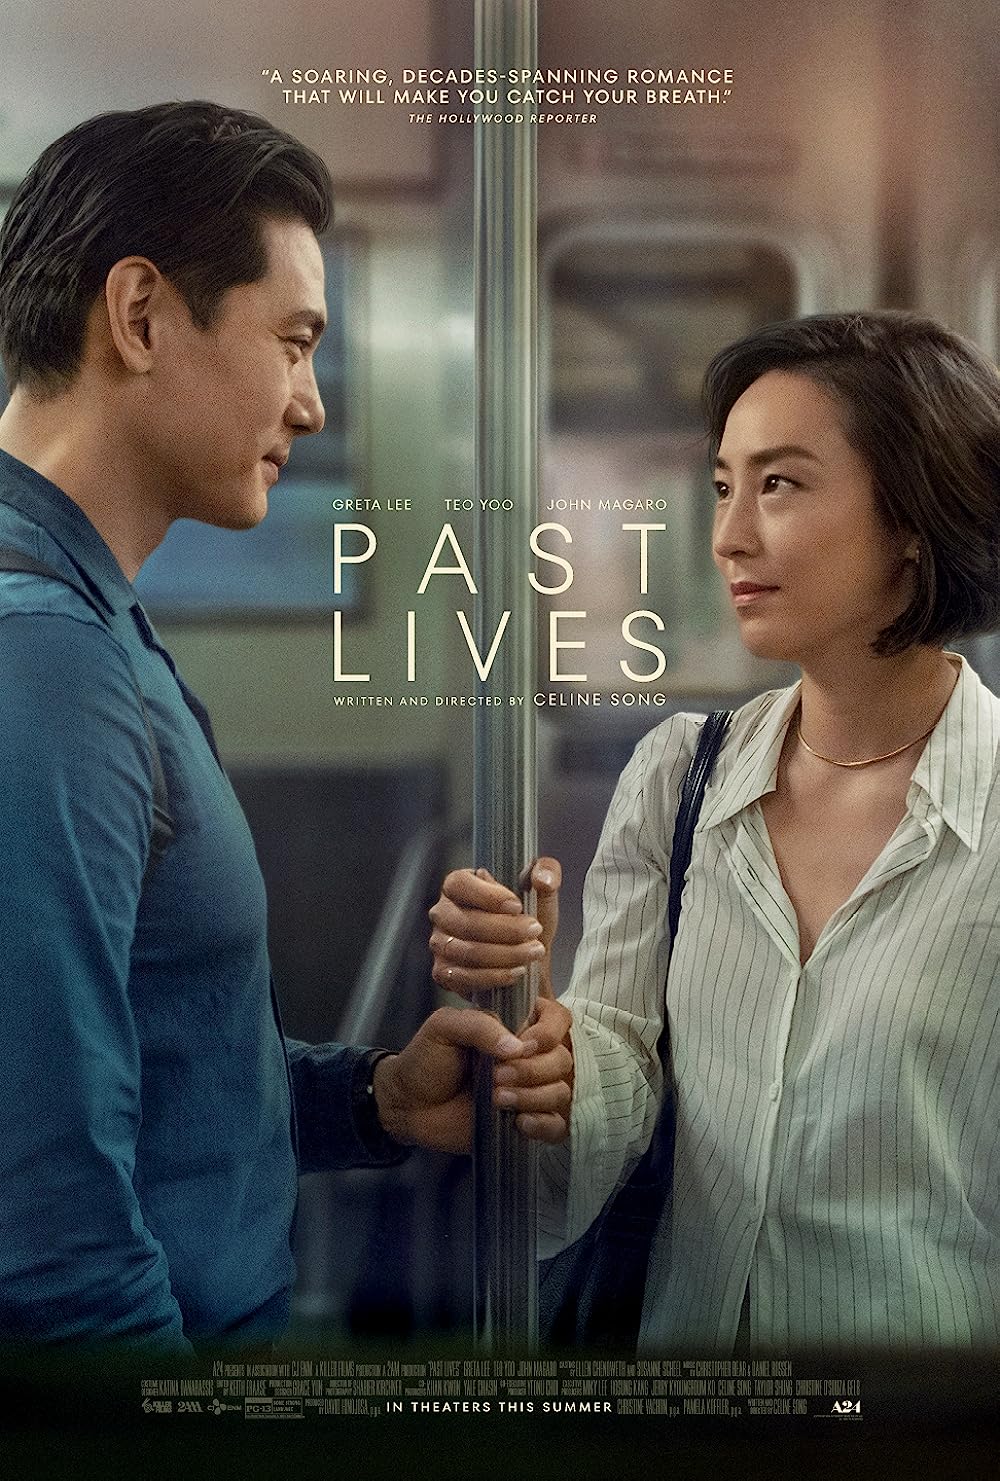 Past Lives (October 13) - Streaming on Lionsgate Play
Nora and Hae Sung, childhood friends with a deep connection, are separated when Nora's family emigrates from South Korea.